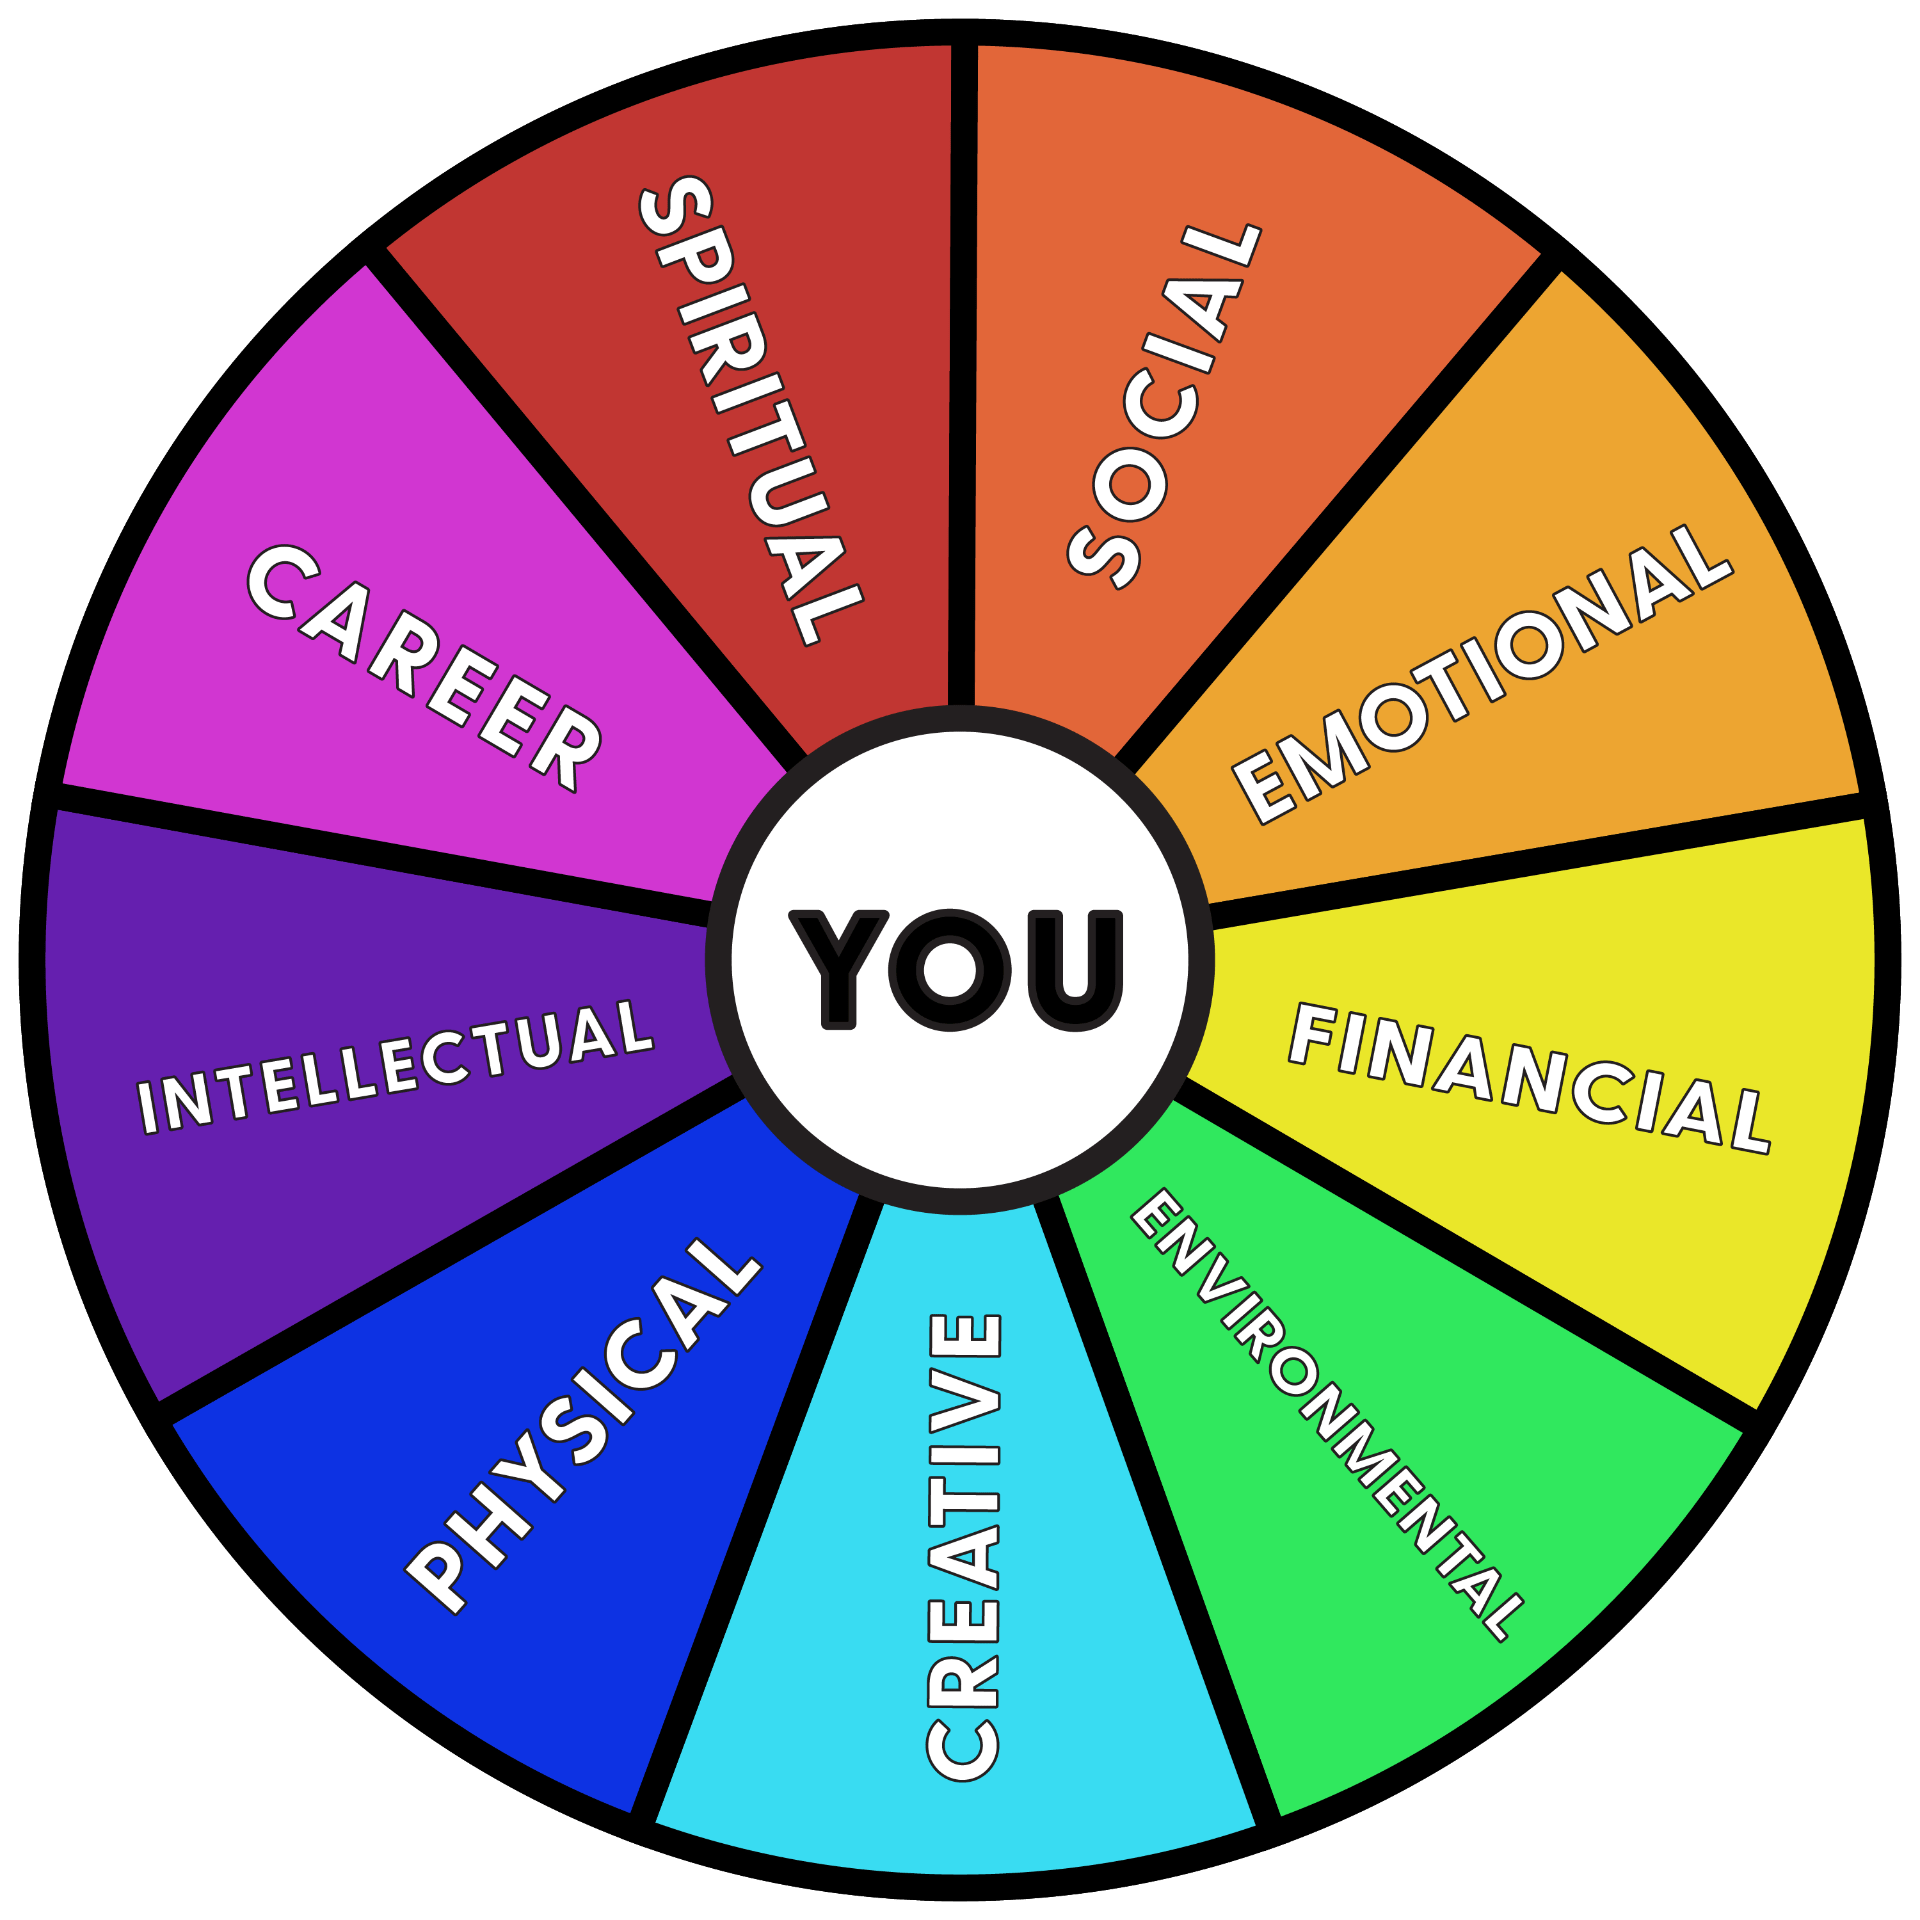 wheel with the word "you" in the center and surrounding it are spokes for each of the 9 wellness dimensions: social, emotional, financial, environmental, creative, physical, intellectual, career and spiritual.